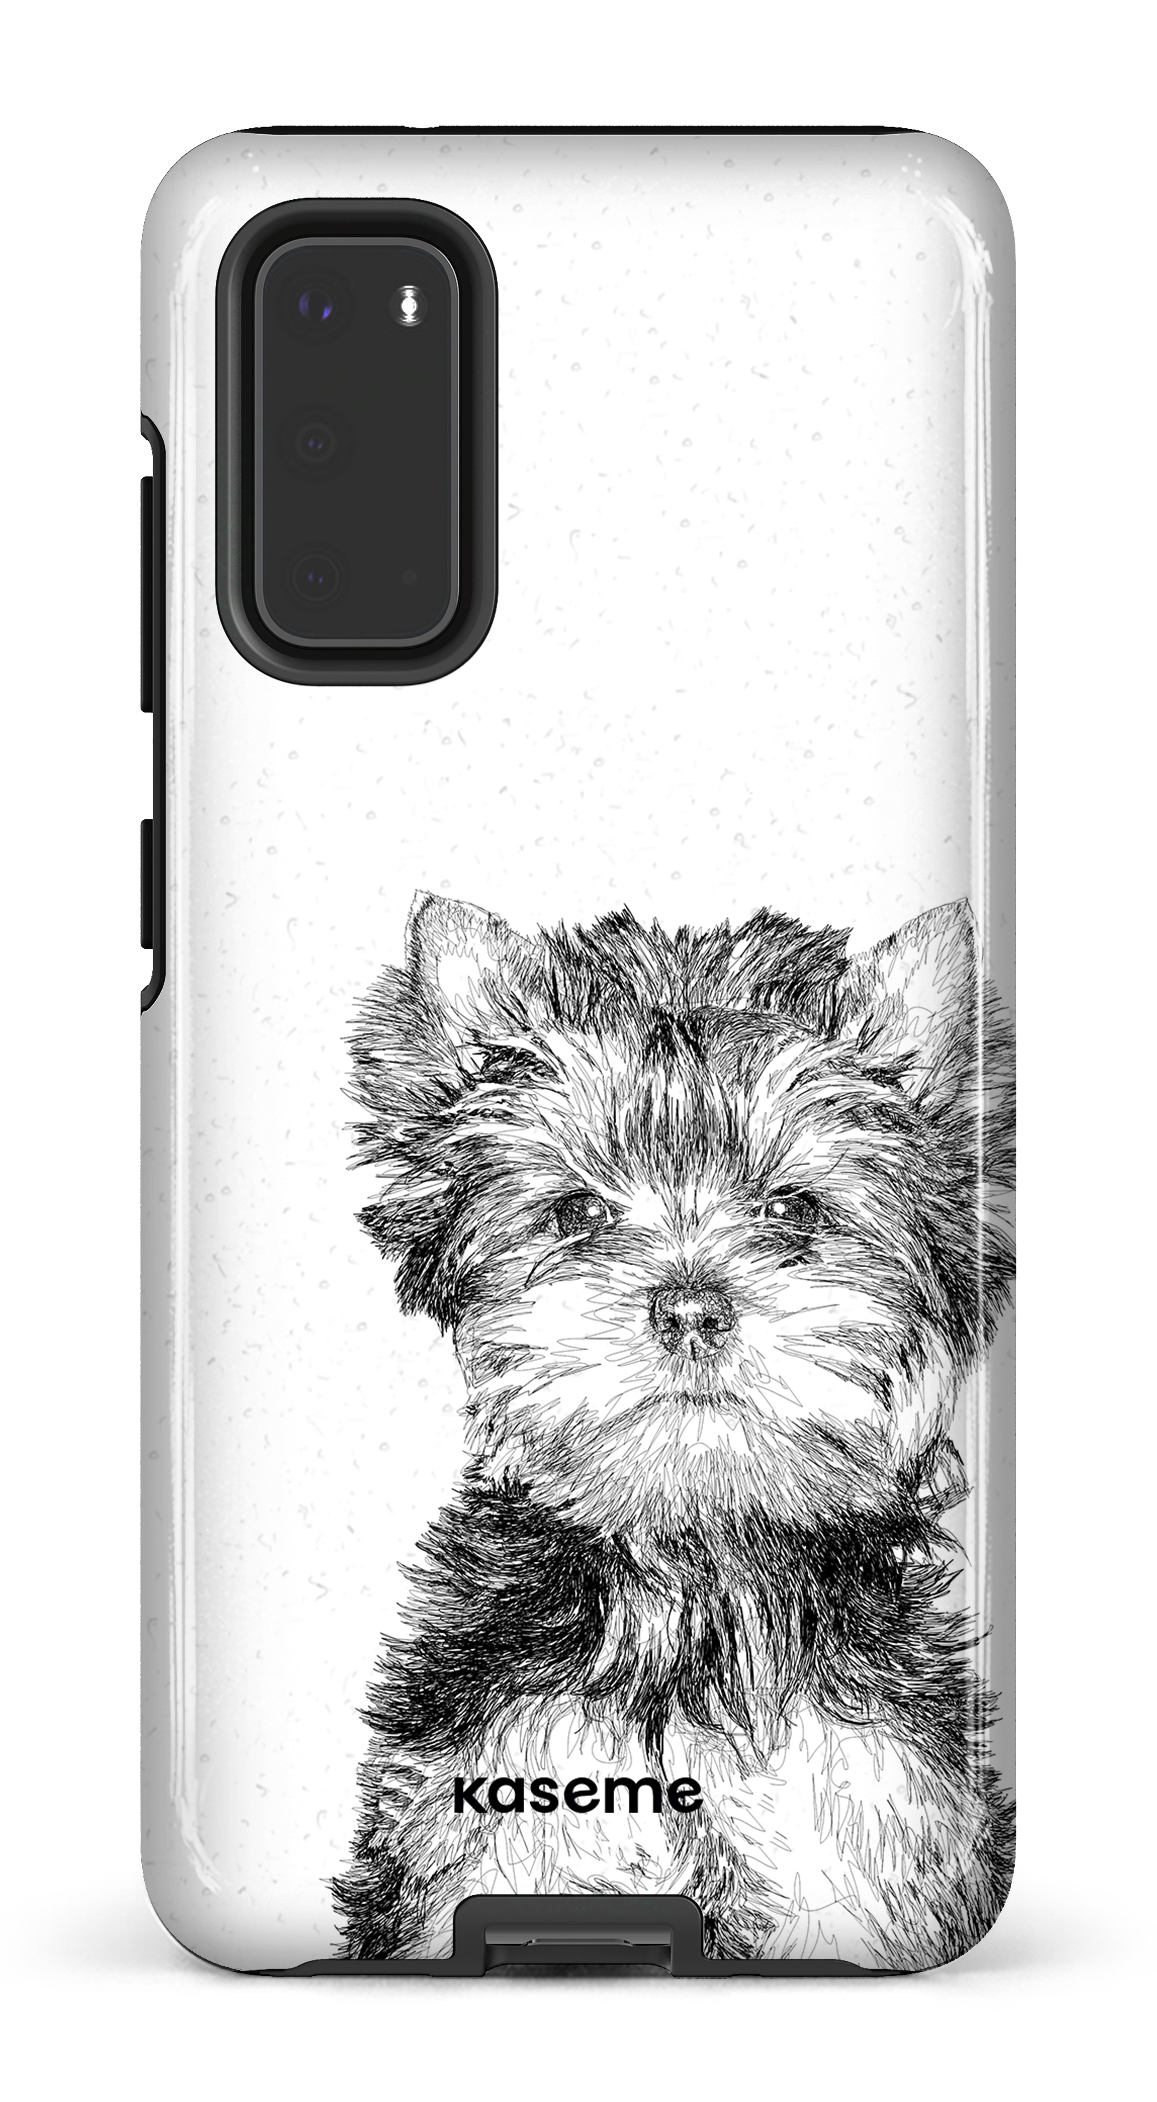 Yorkshire Terrier - Galaxy S20